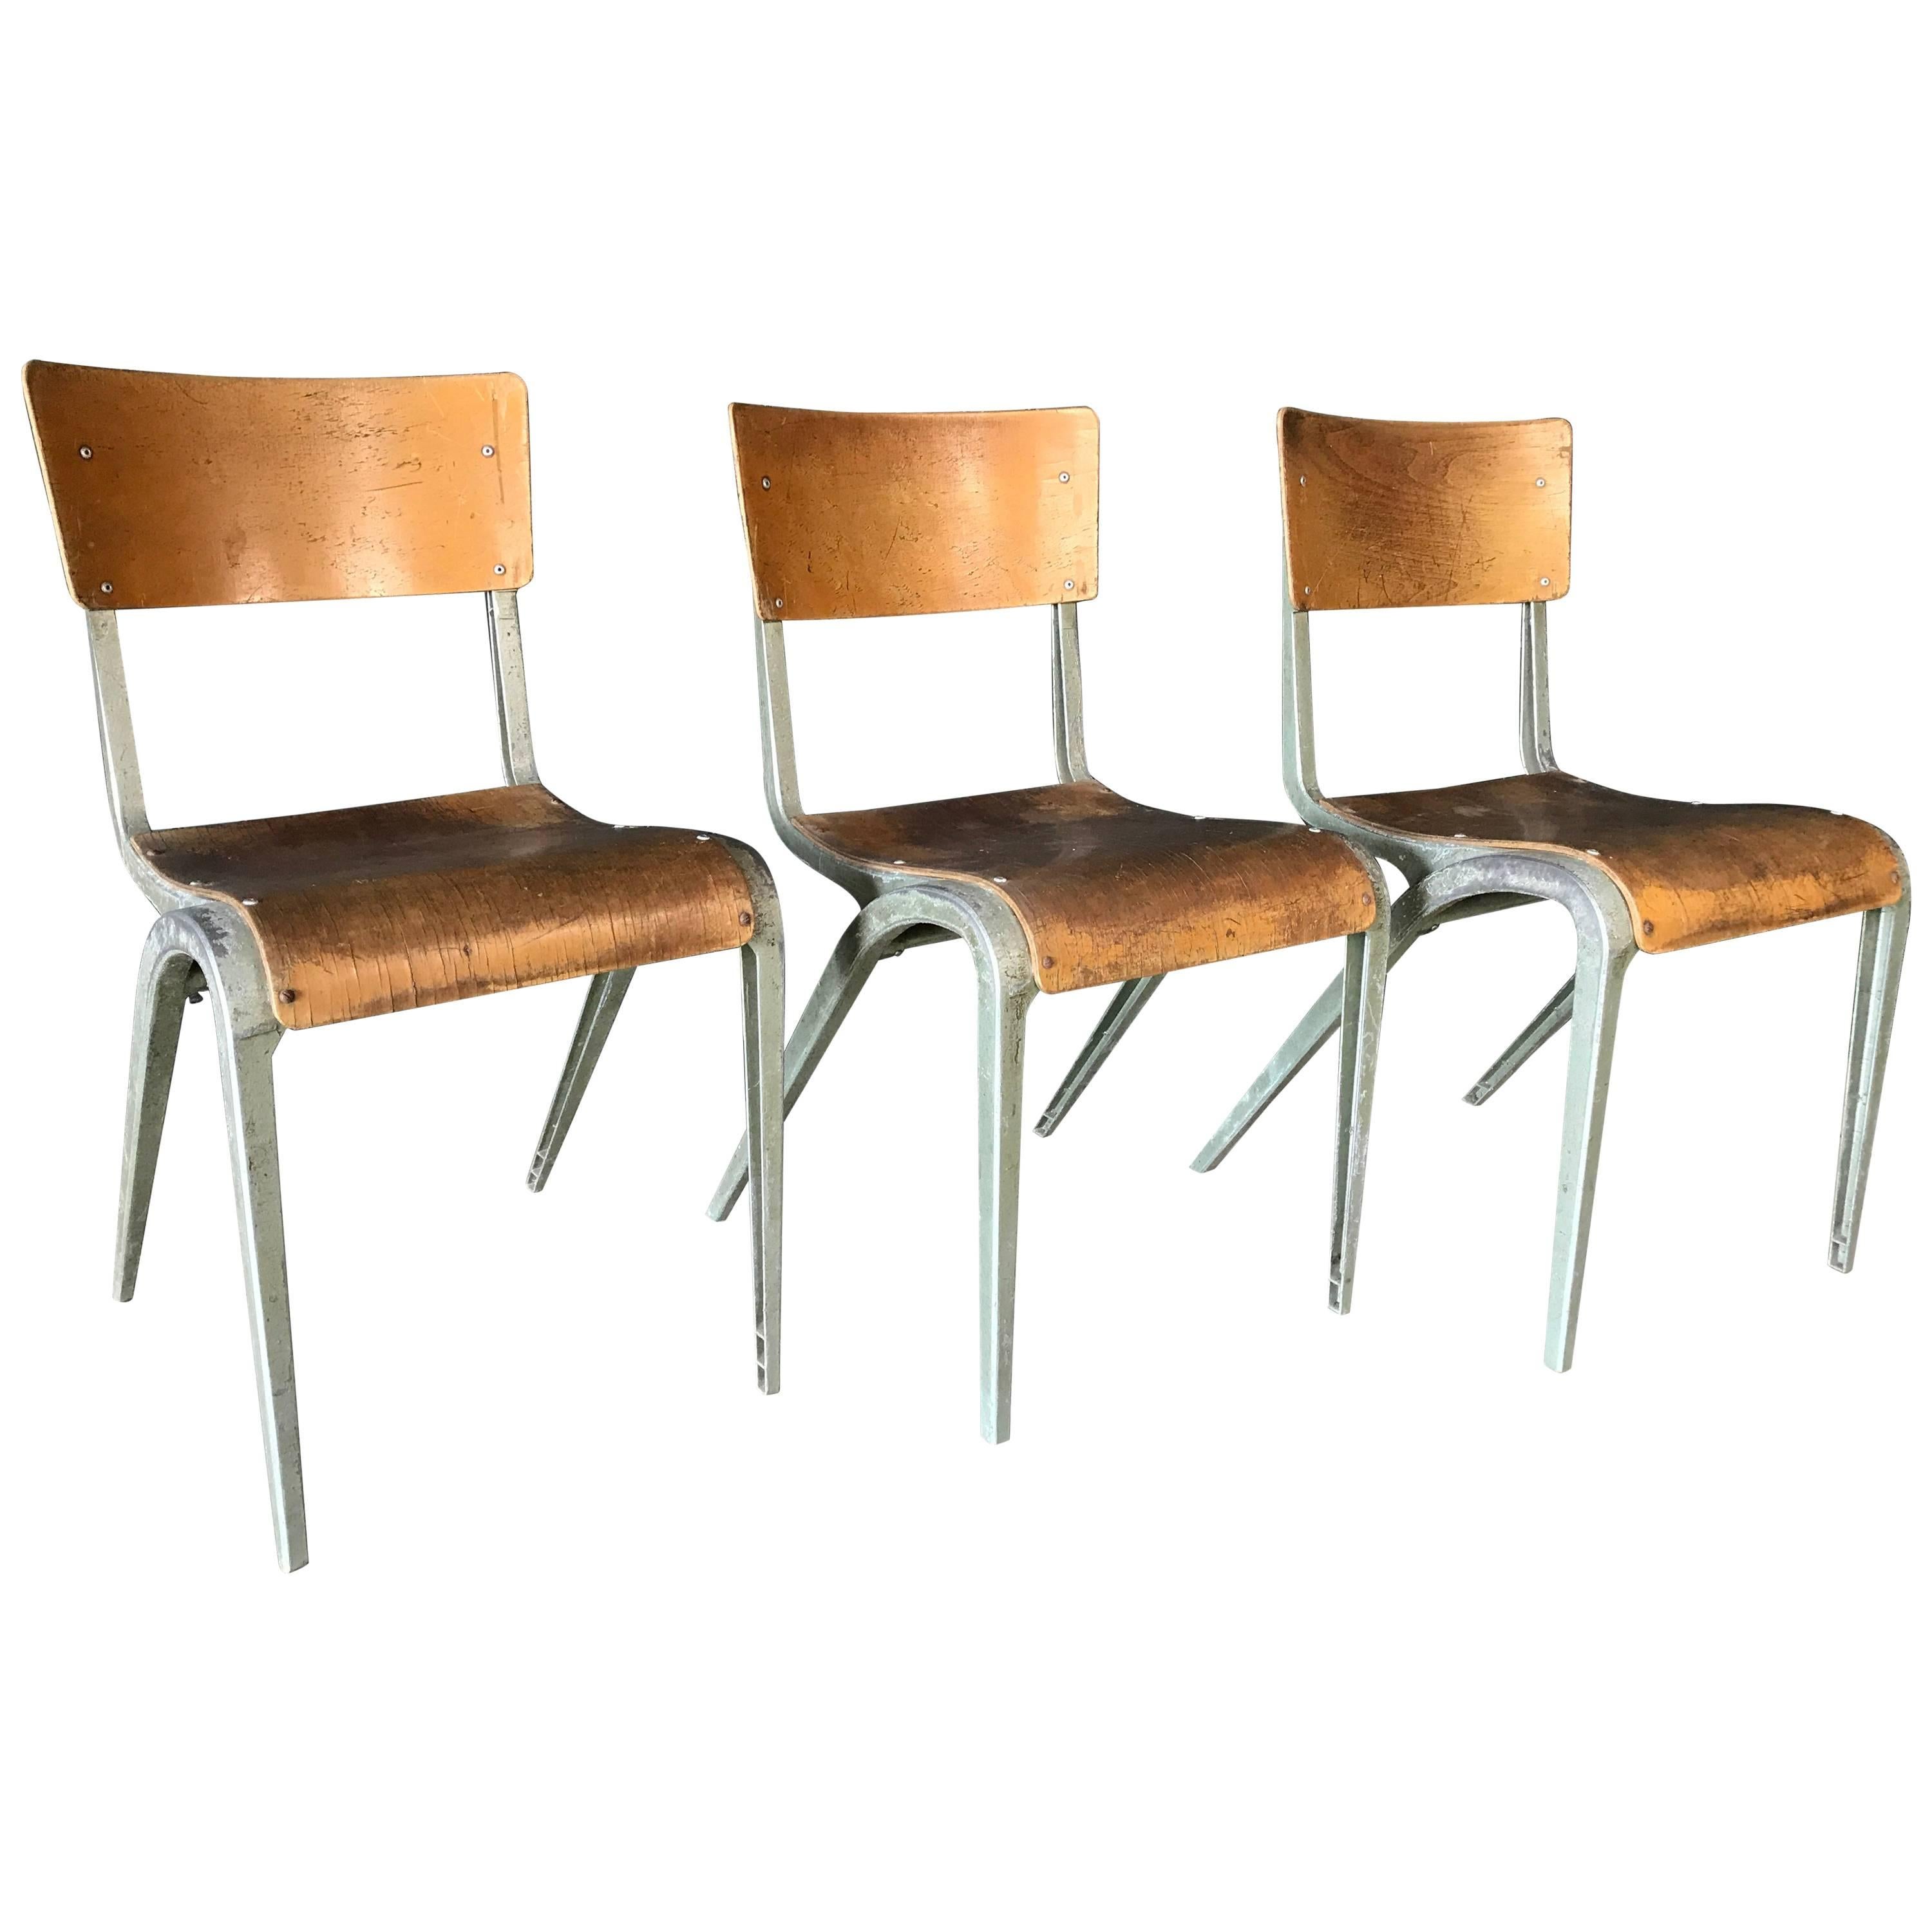 Three French Industrial Chairs by James Leonard for Esavian